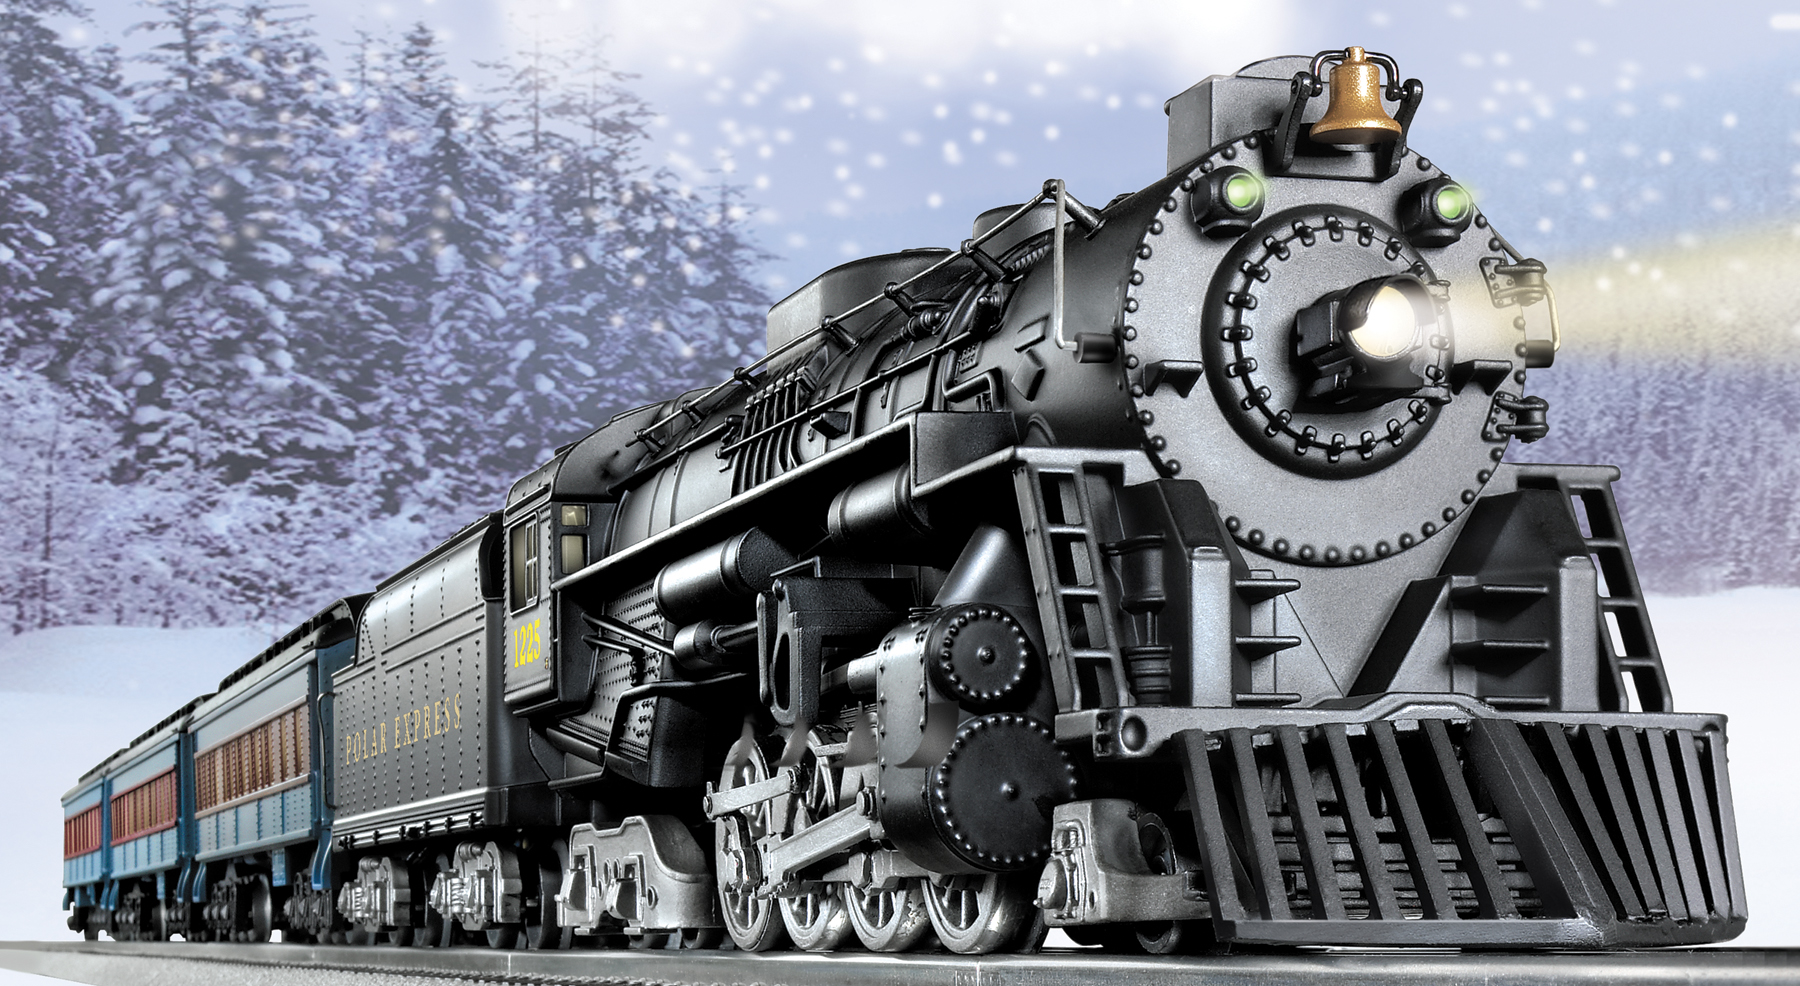  Polar Express is coming to American Flyer. (O Scale artwork shown